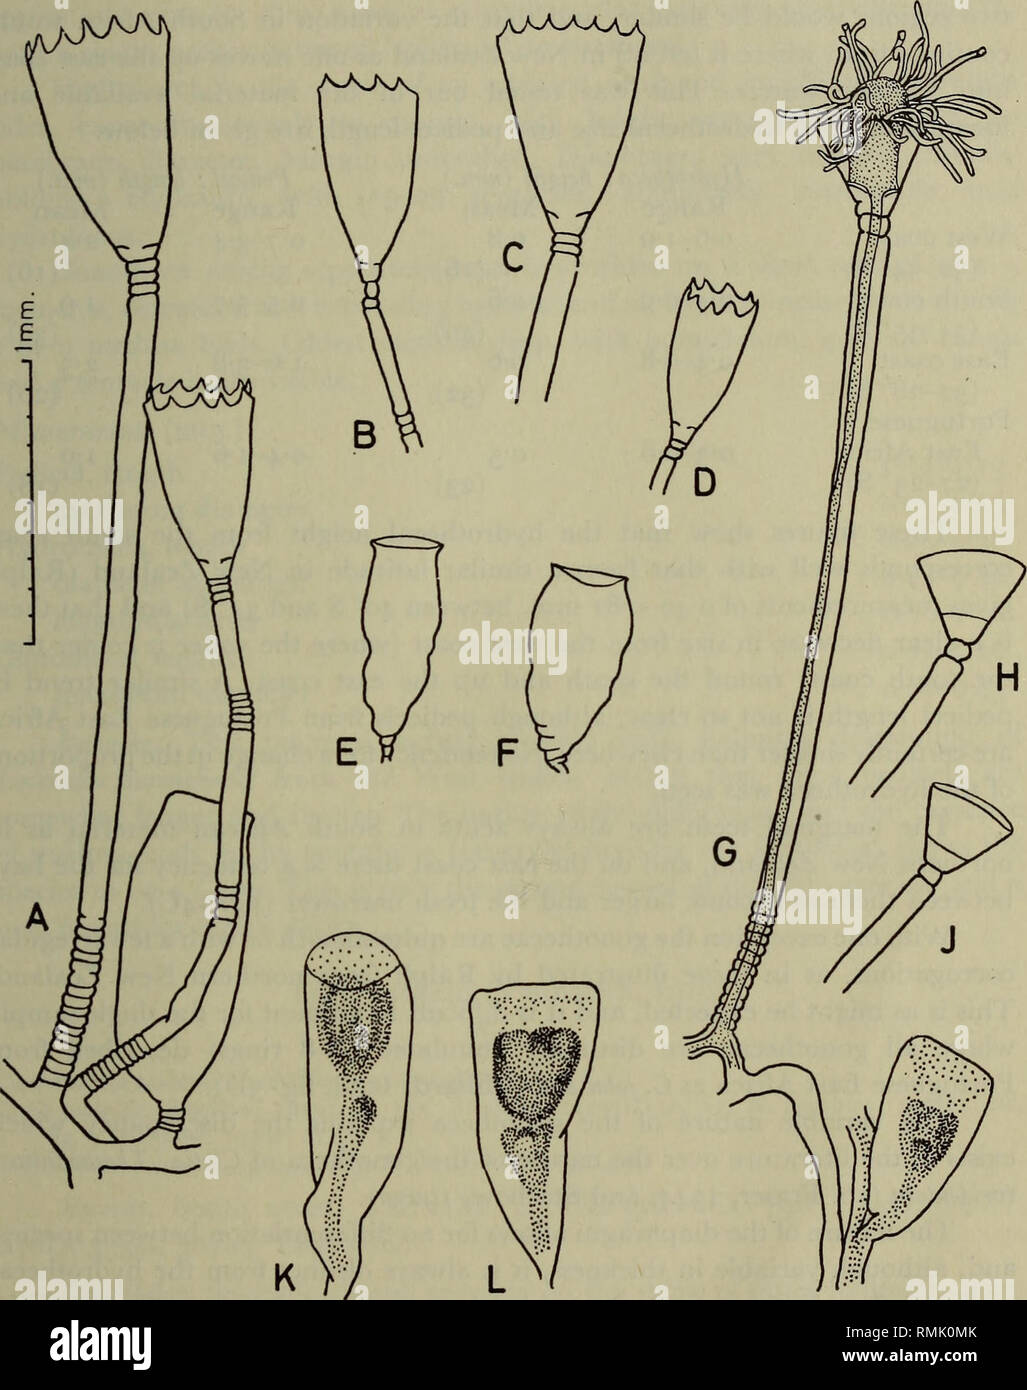 . Annals of the South African Museum. Annale van die Suid-Afrikaanse Museum. HYDROZOA OF THE SOUTH AND WEST COASTS OF SOUTH AFRICA 479 /JVAM. Fig. 14. Clytia hemisphaerica (Linn.) (A-F), and C. hummelincki (Leloup) (G-L). A-D. Various hydrothecae showing variation in total size and shape of marginal teeth: A with triangular teeth, B and D with asymmetrical teeth and C with very slender teeth. E and F. Gonothecae, corrugated type (a smooth one shown in A). G. A hydrotheca containing a hydranth, and a gonotheca. H and J. Empty hydrothecae. K and L. Gonothecae containing young medusae. , (A from  Stock Photo